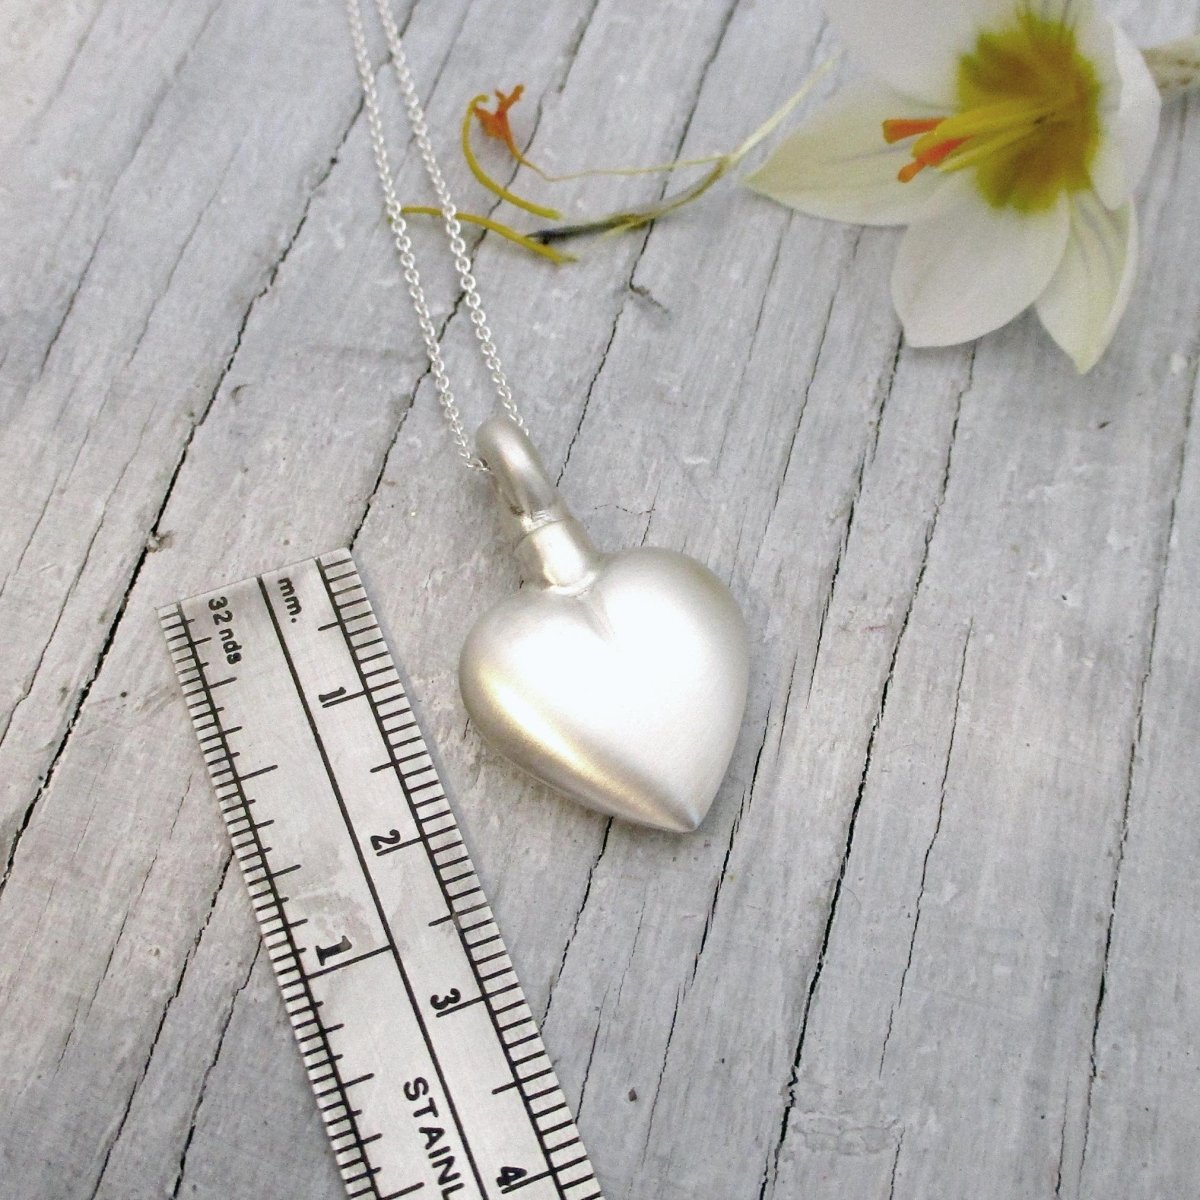 Heart Urn Pendant for Cremation Ashes in Sterling Silver, Holds Human or Pet Ashes - Luxe Design Jewellery